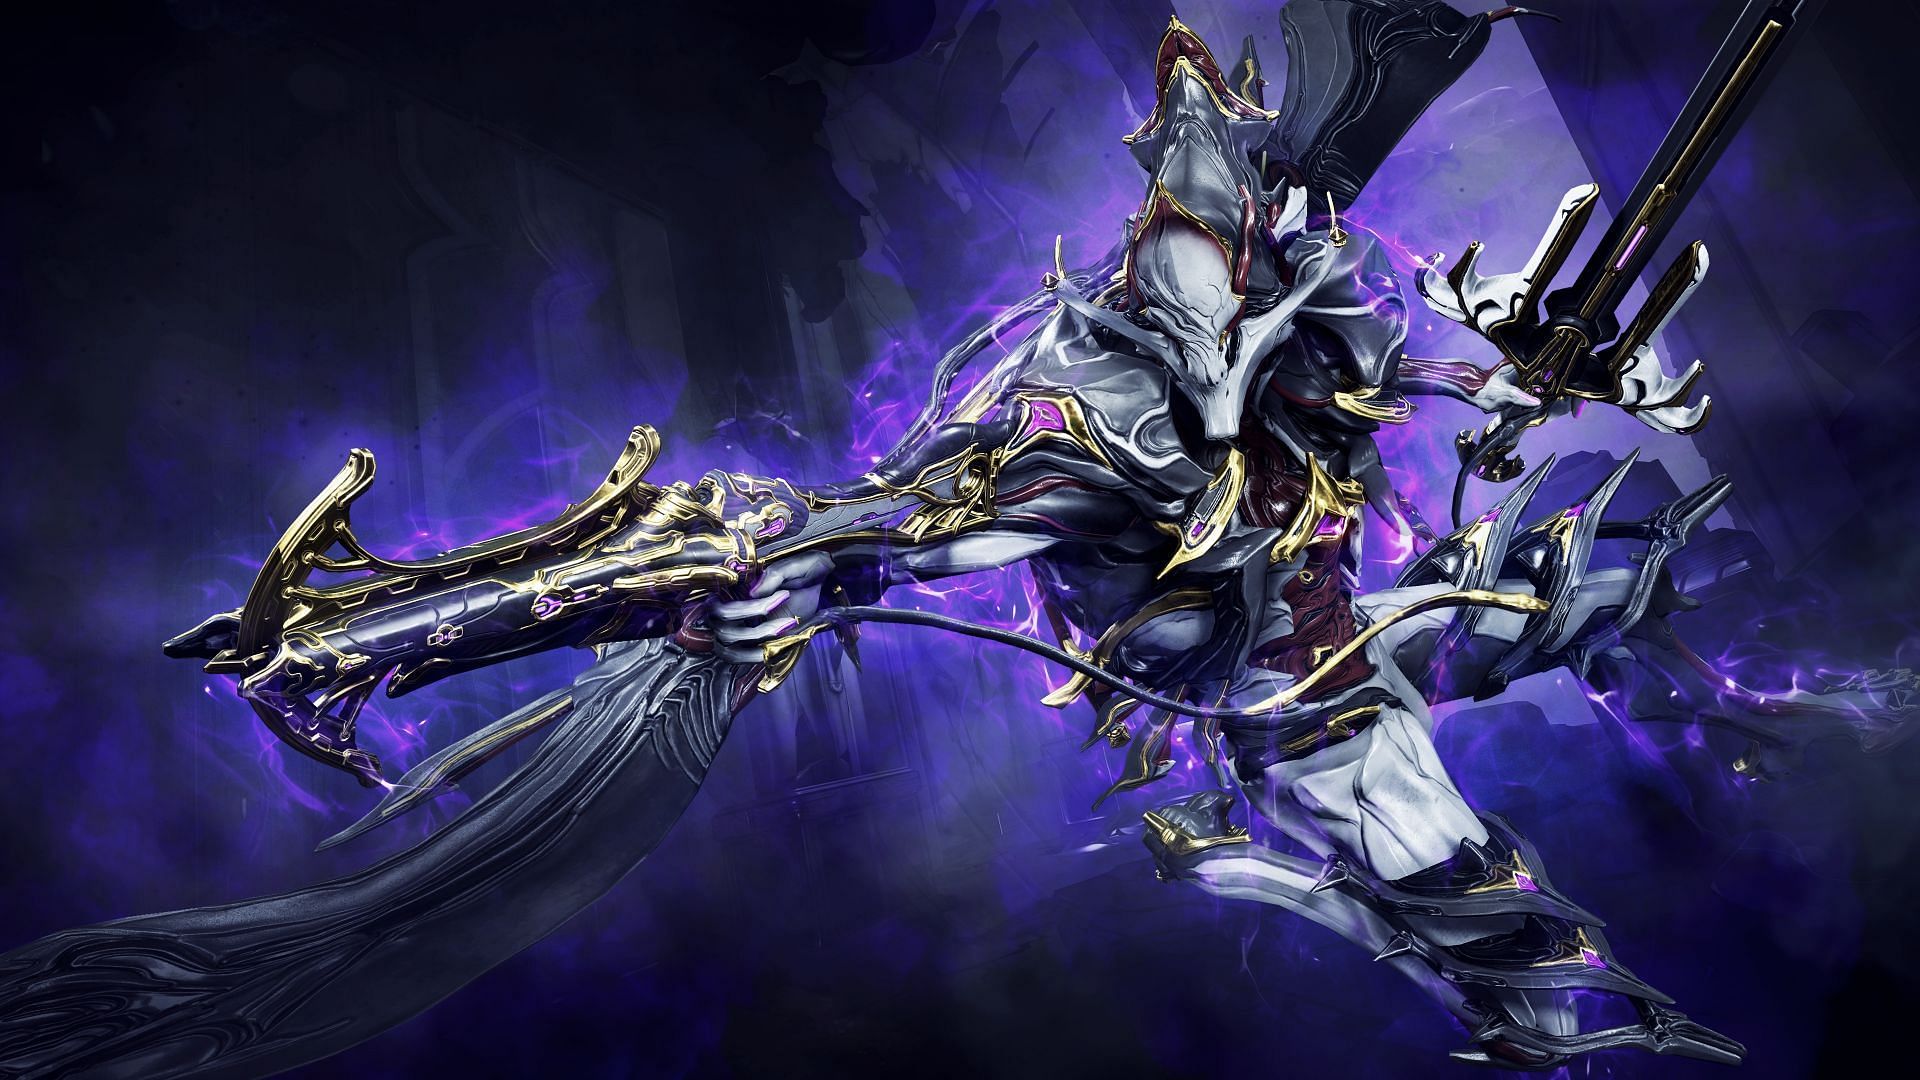 Nekros is one of the most popular frames due to his loot-duplication ability (Image via Digital Extremes)